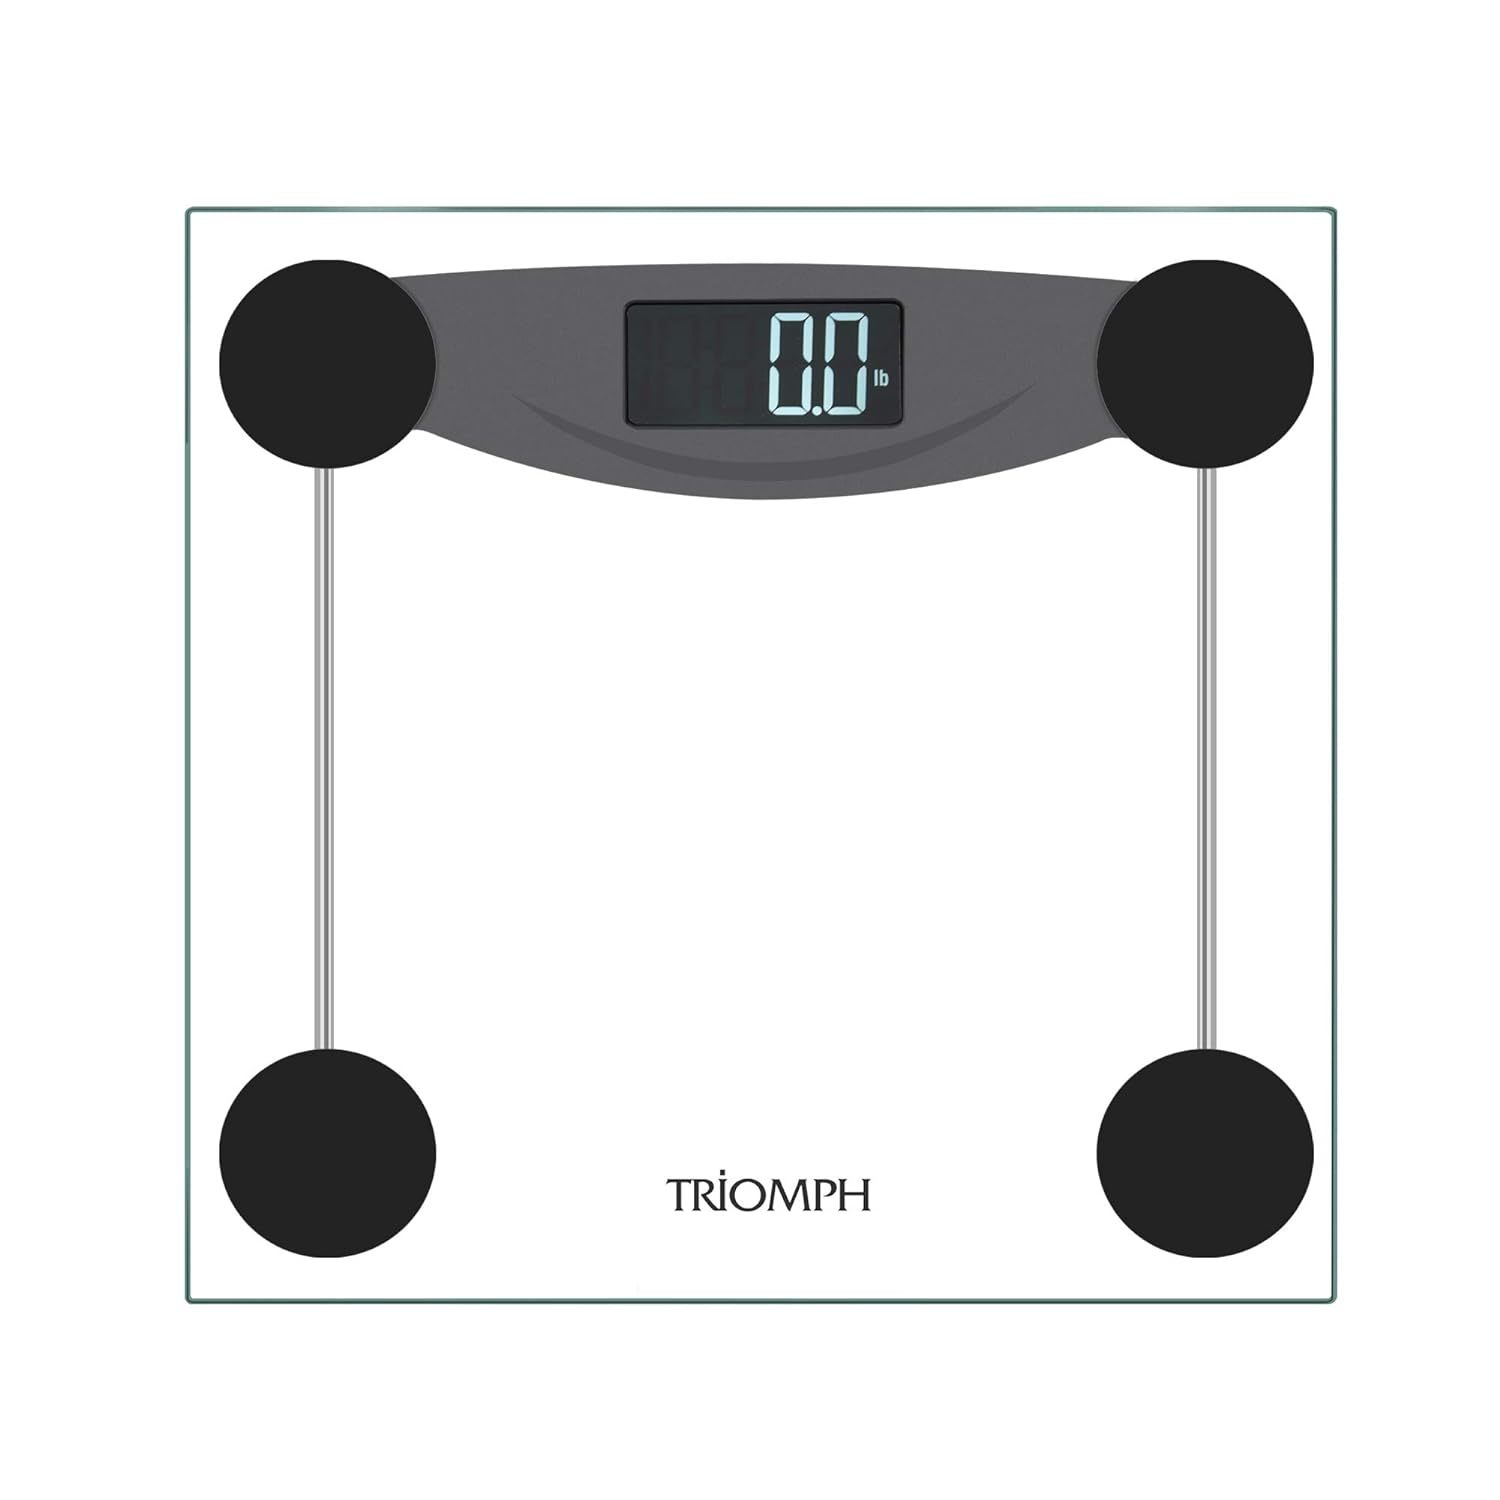 InstaTrack Large Dial Metal Analog Bathroom Scale with Silver Mat